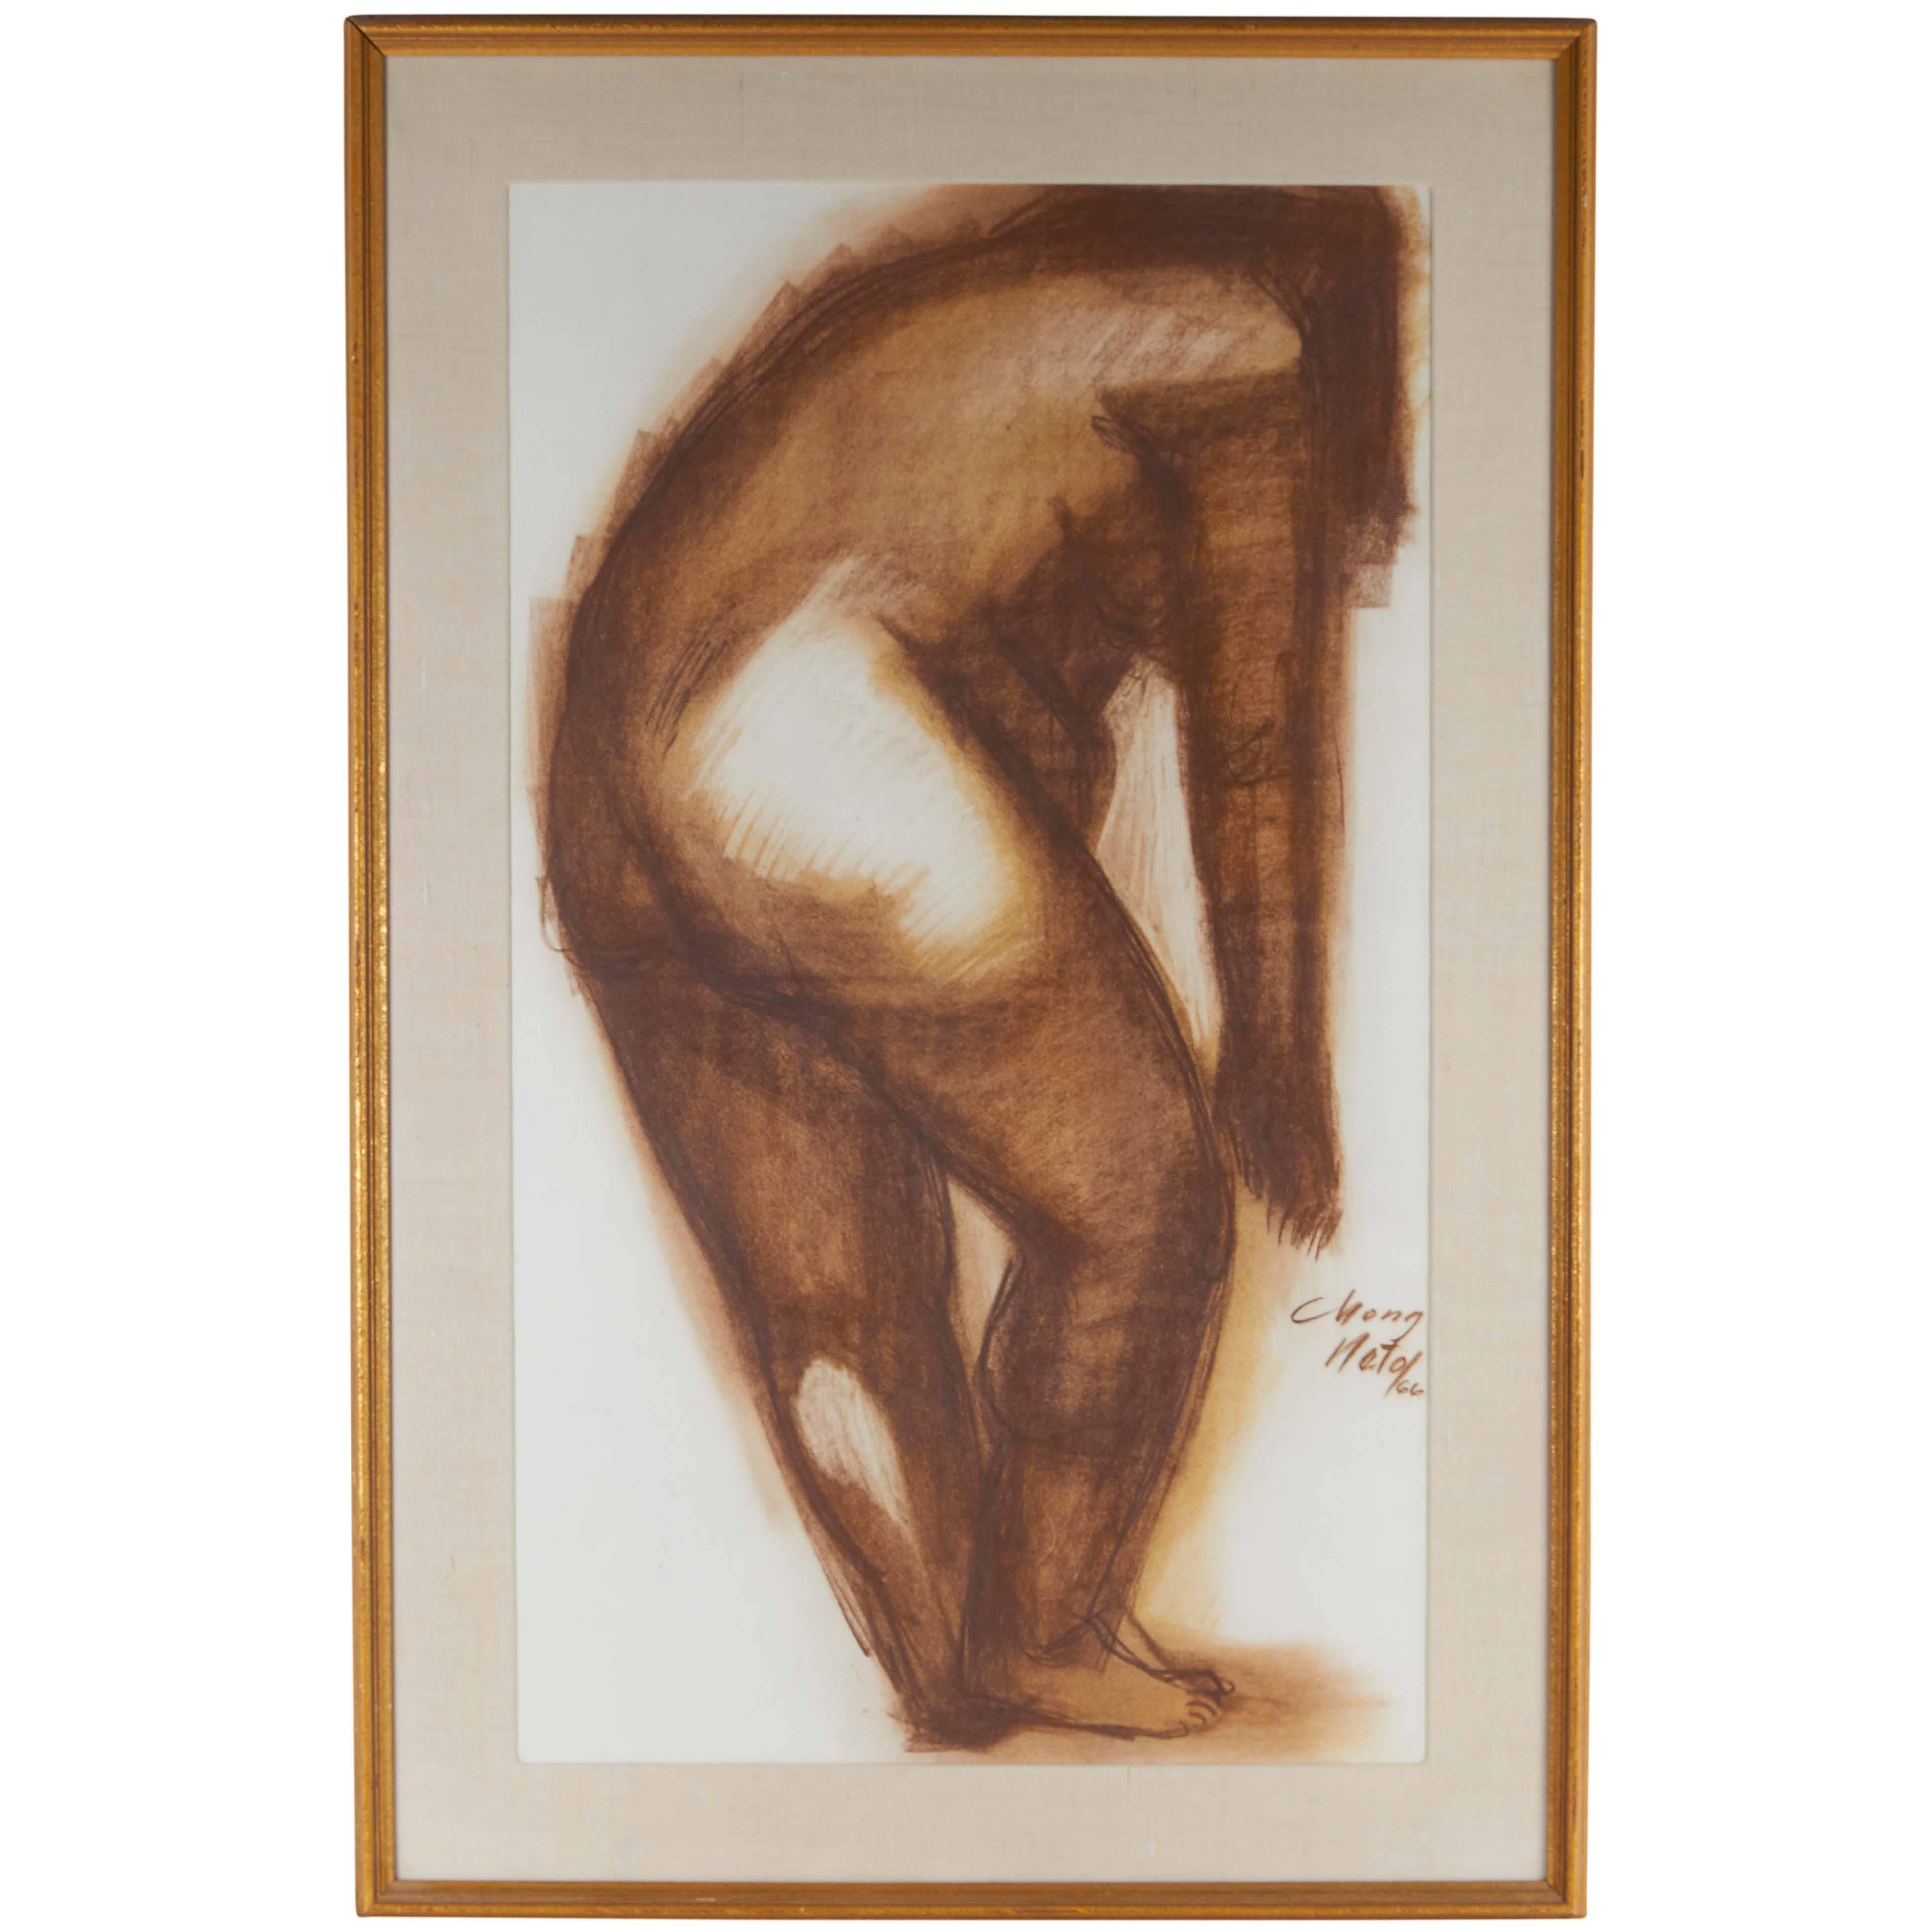 Chong Neto, Nude Study, Gouache and Charcoal on Paper, Signed